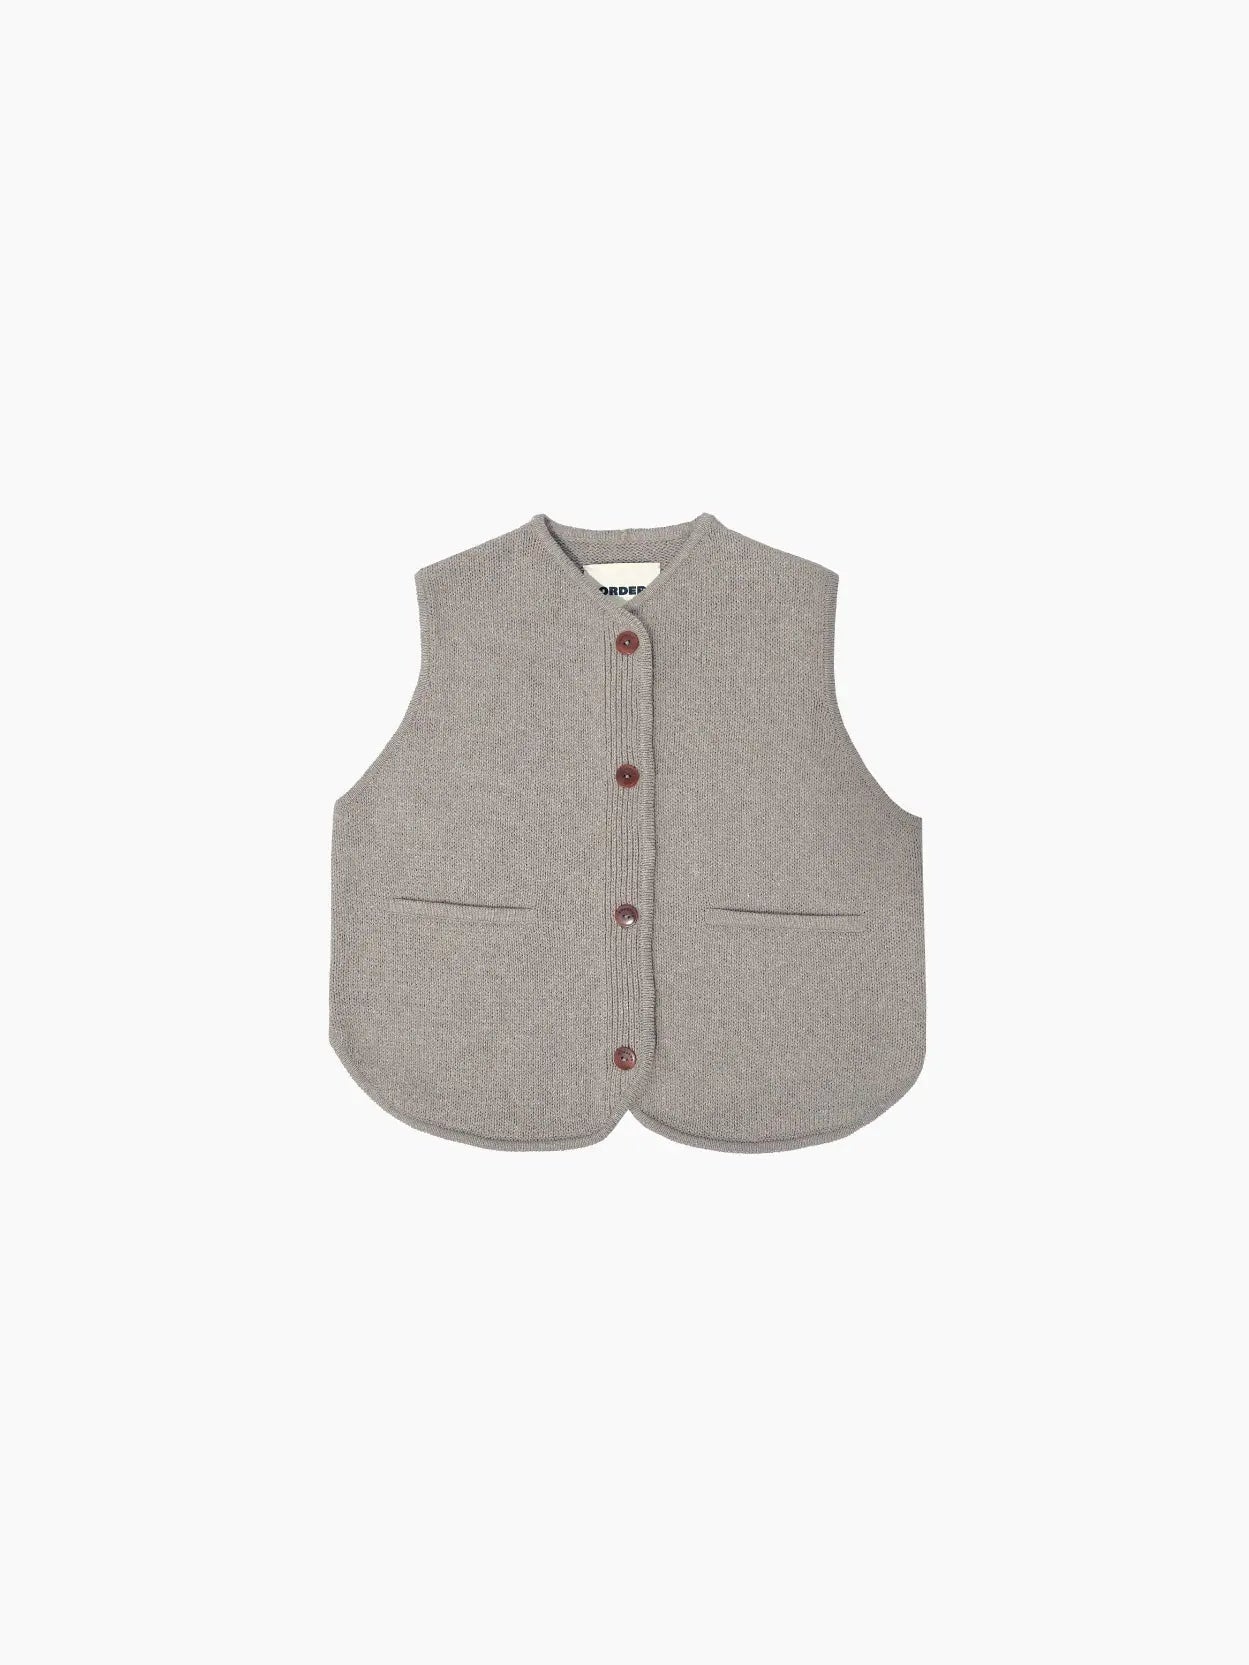 A gray sleeveless vest with a rounded hem, front buttons, and two side pockets. The Cotton Waistcoat Taupe by Cordera embodies a simple, minimalist design and is displayed against a plain white background. Available exclusively at Bassalstore in Barcelona.